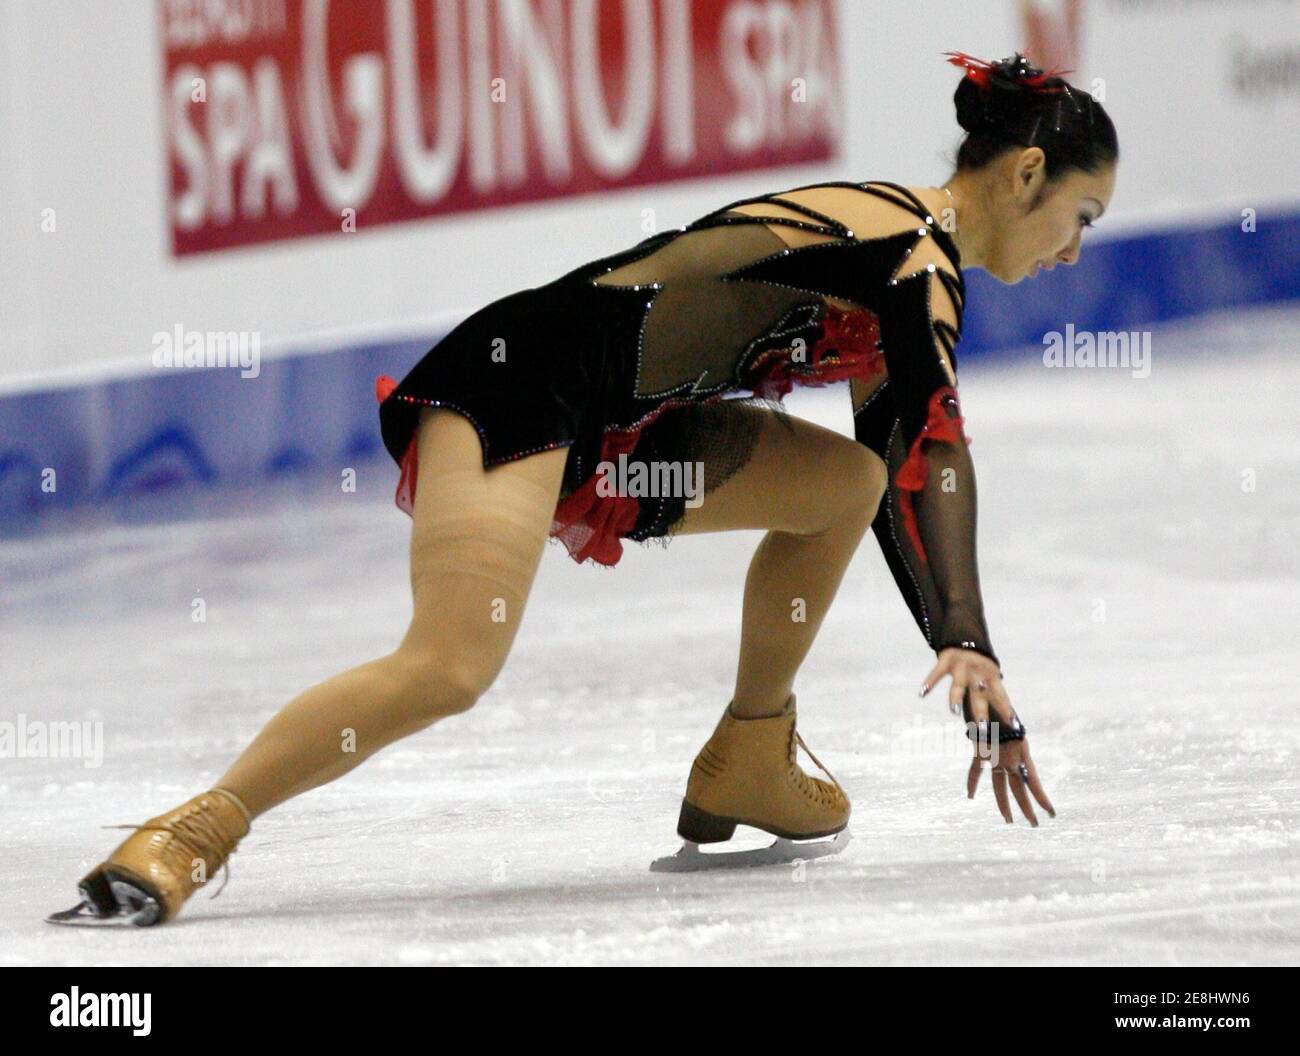 Japan's Miki Ando falls during the women's free skating program at the ISU Four Continents Figure Skating Championships in Goyang, northwest of Seoul, February 16, 2008. Ando won the bronze medal.       REUTERS/Jo Yong-Hak (SOUTH KOREA) Stock Photo